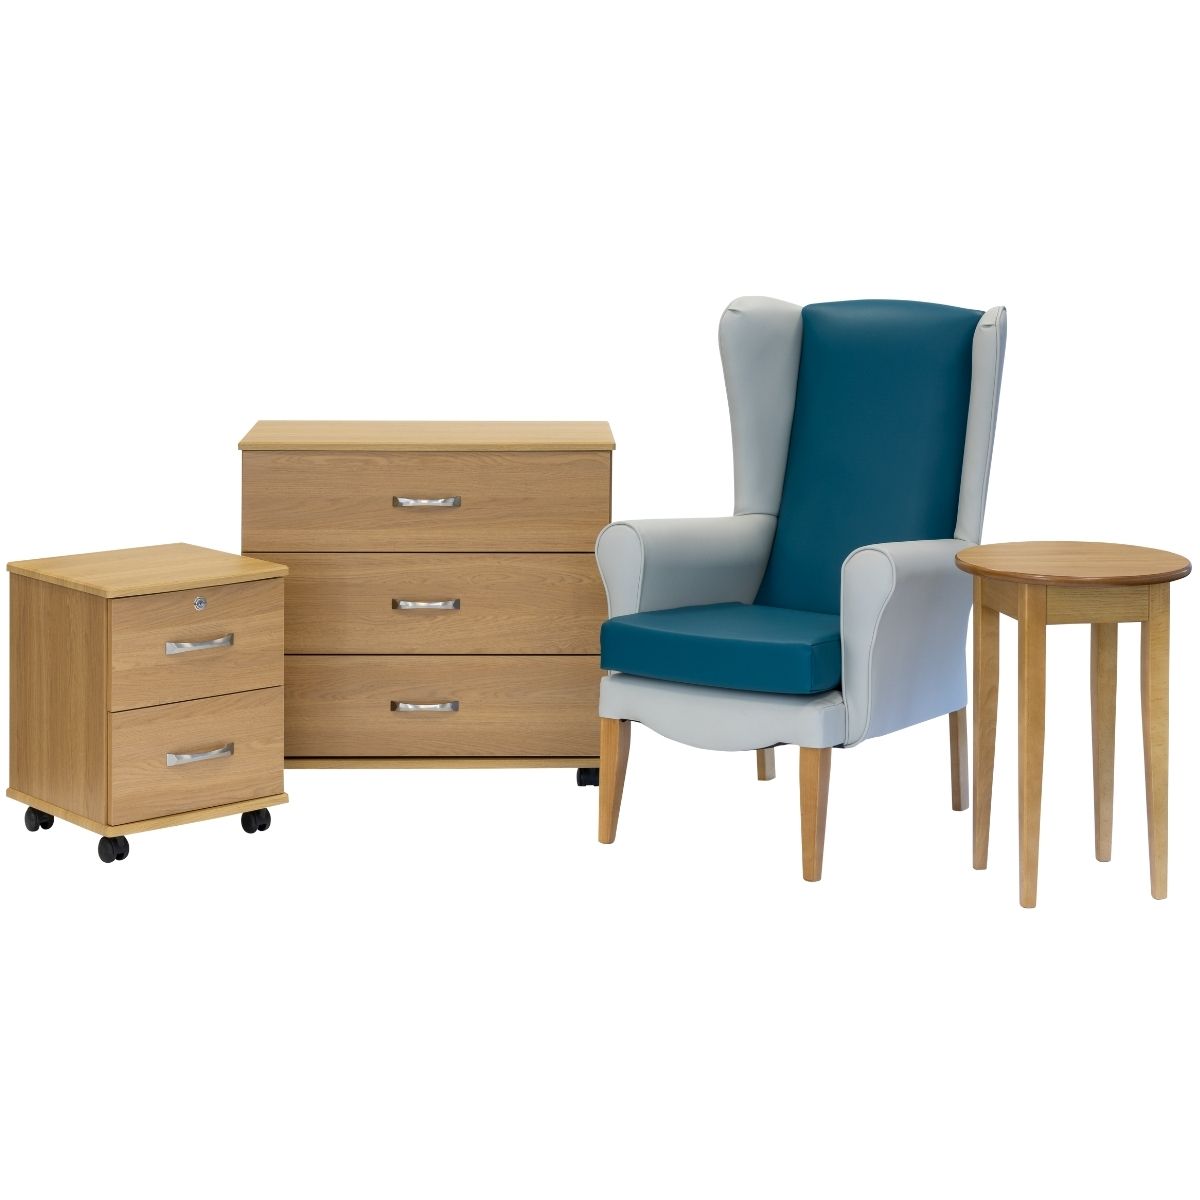 various furniture items from spearhead's fast delivery stock furniture range